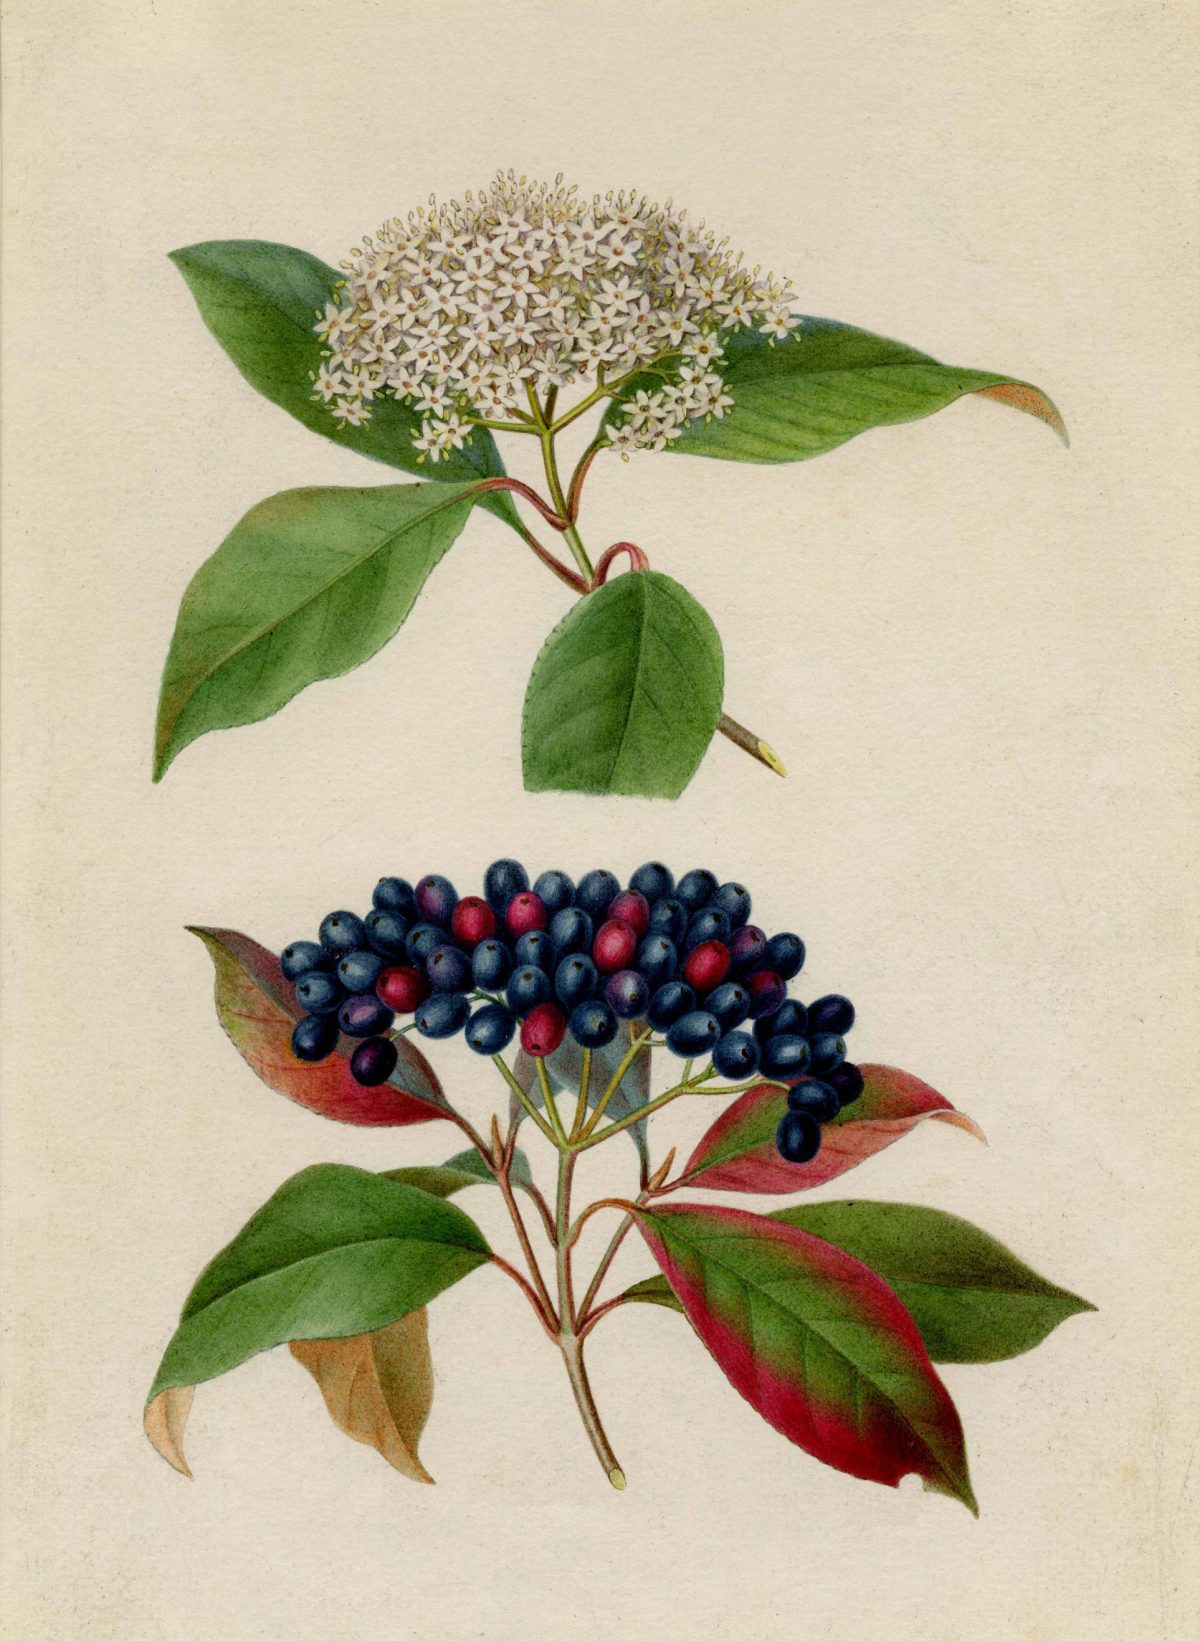 Witherod"Two details of witherod (Viburnum cassinoides), a shrub also known as wild raisin. One detail of the leaves and flower, another of the leaves and fruit." 